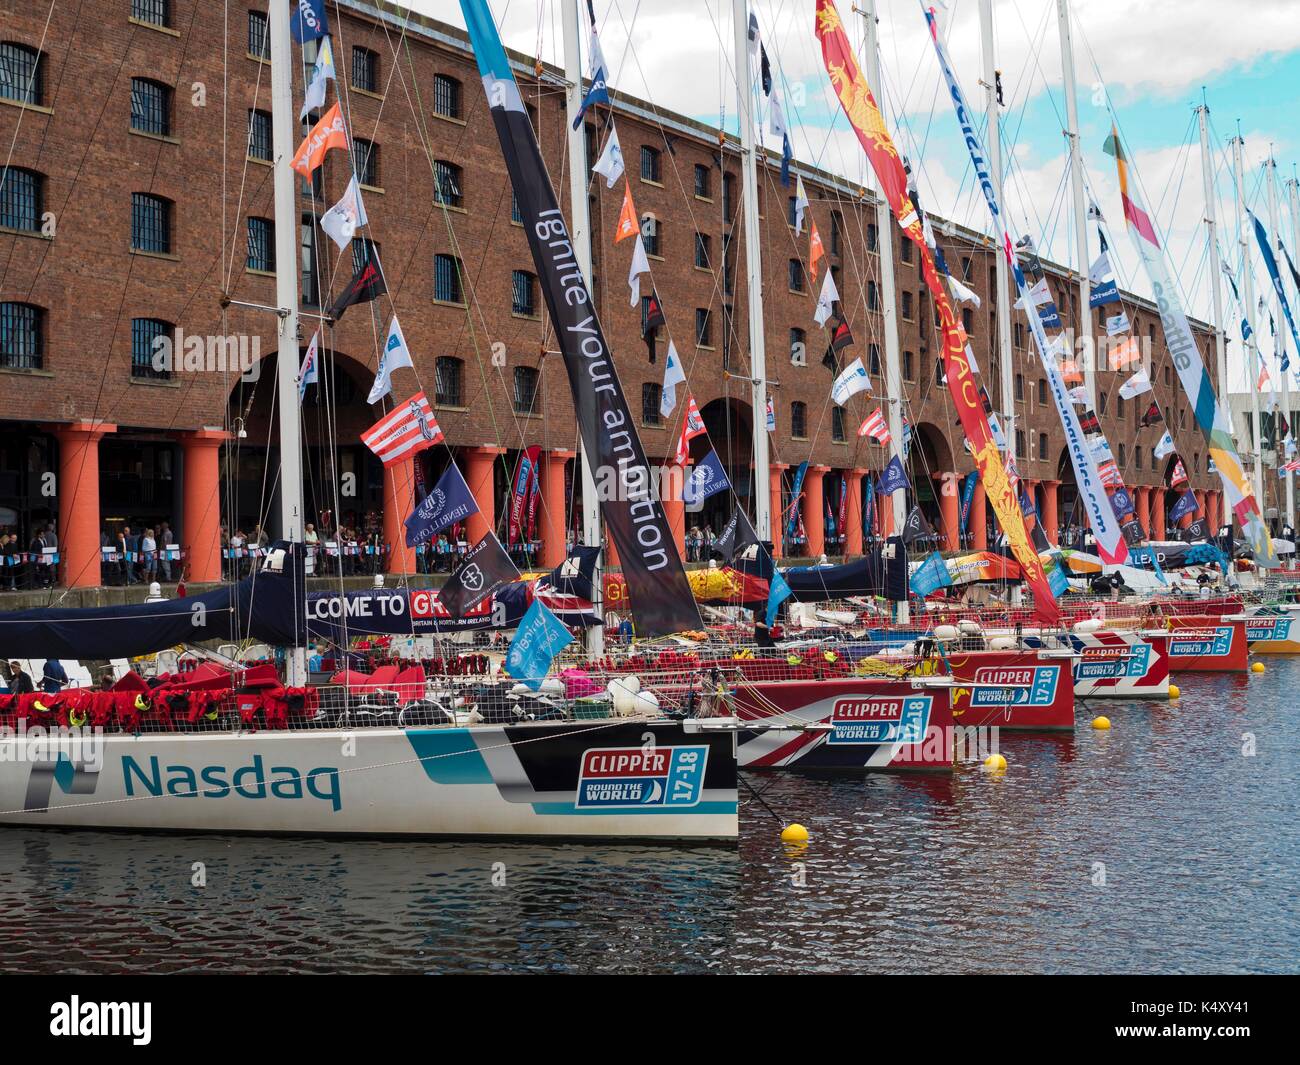 Yachts competing in the 2017 Clipper Race before the start at Albert Dock, Liverpool. The Nasdaq sponsored yacht is in the foreground. Stock Photo